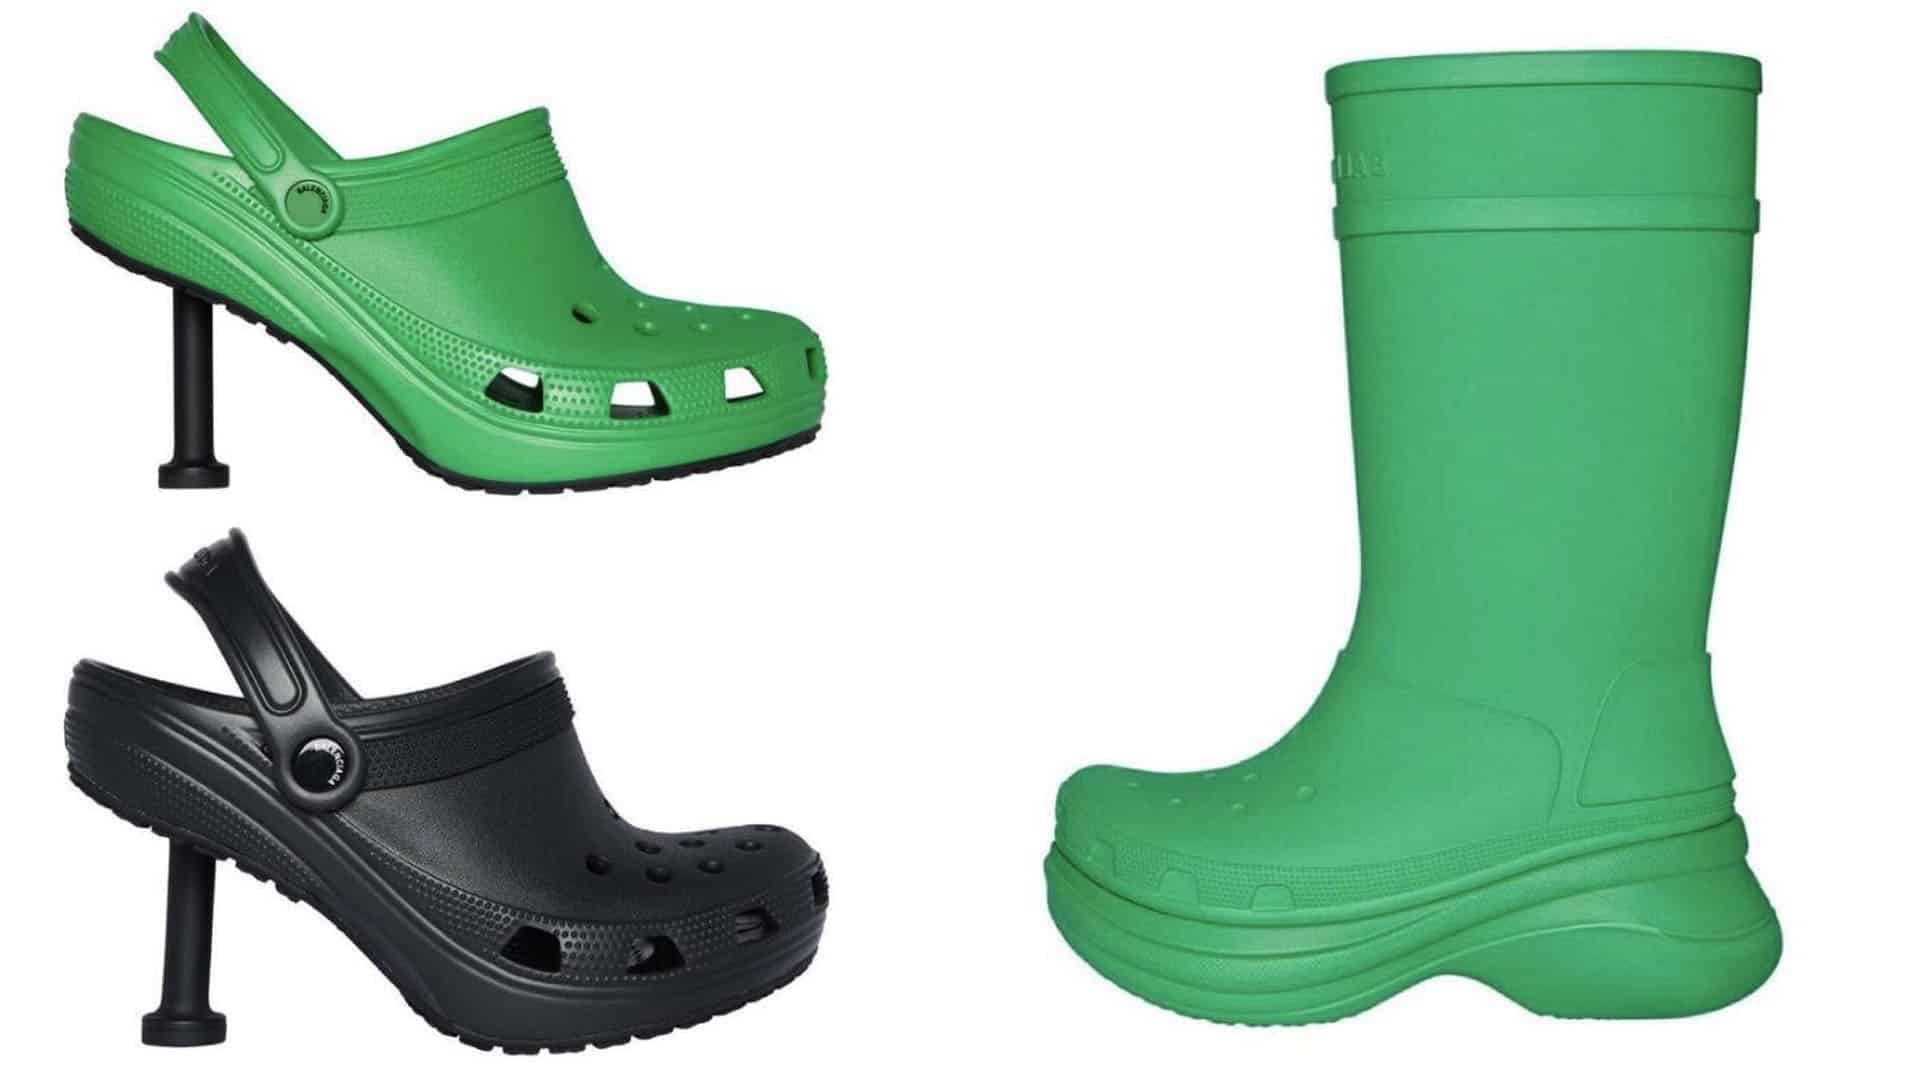 Do Balenciaga’s Stiletto Crocs Have Meaning Behind Them? | What's Trending